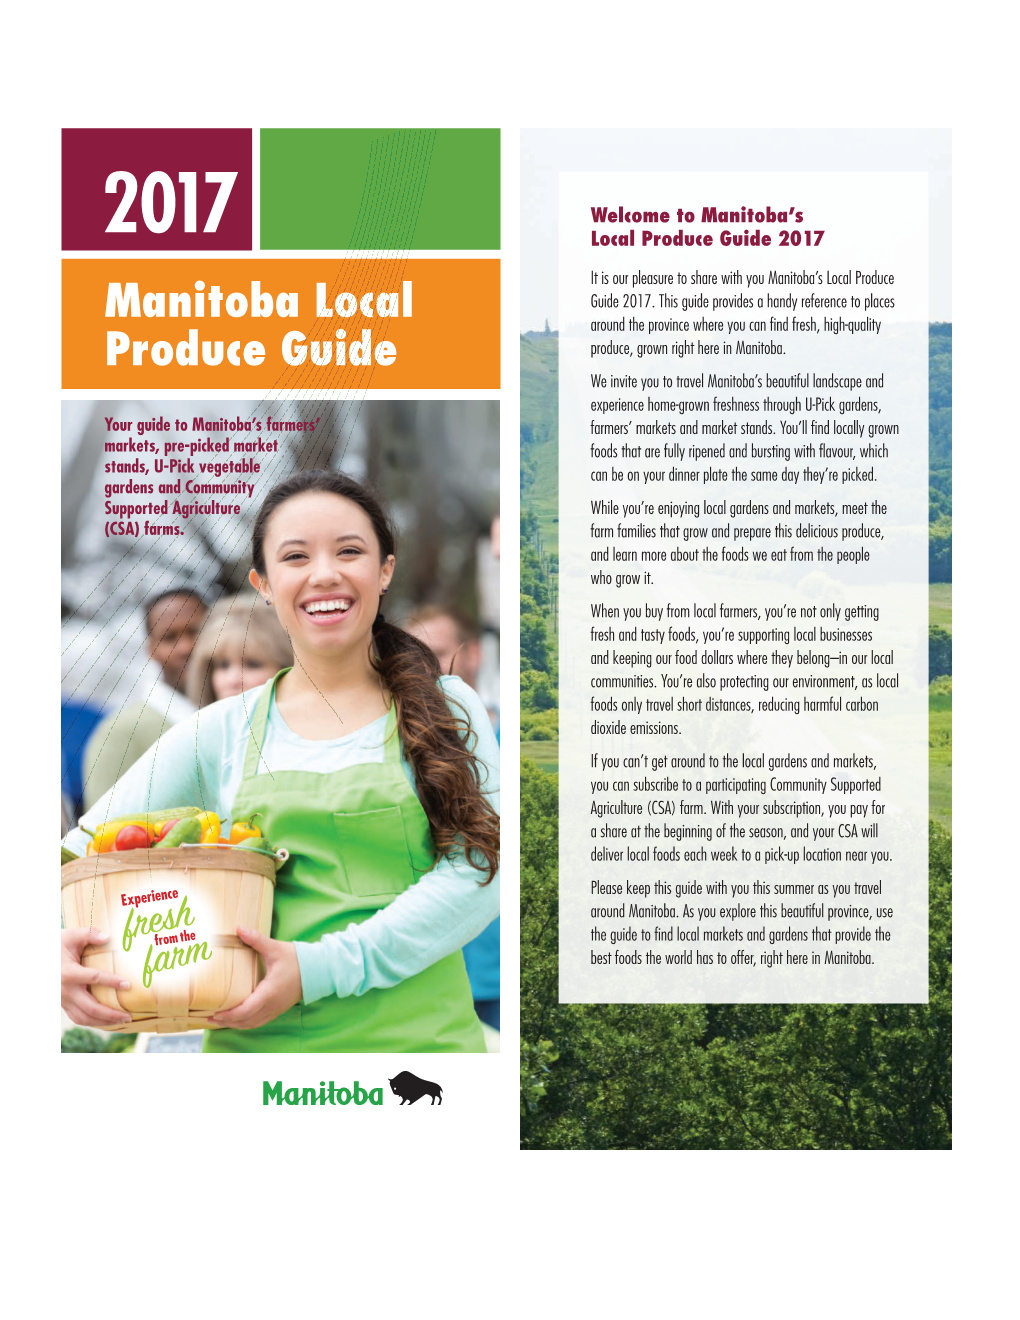 Local Produce Guide 2017 It Is Our Pleasure to Share with You Manitoba’S Local Produce Guide 2017